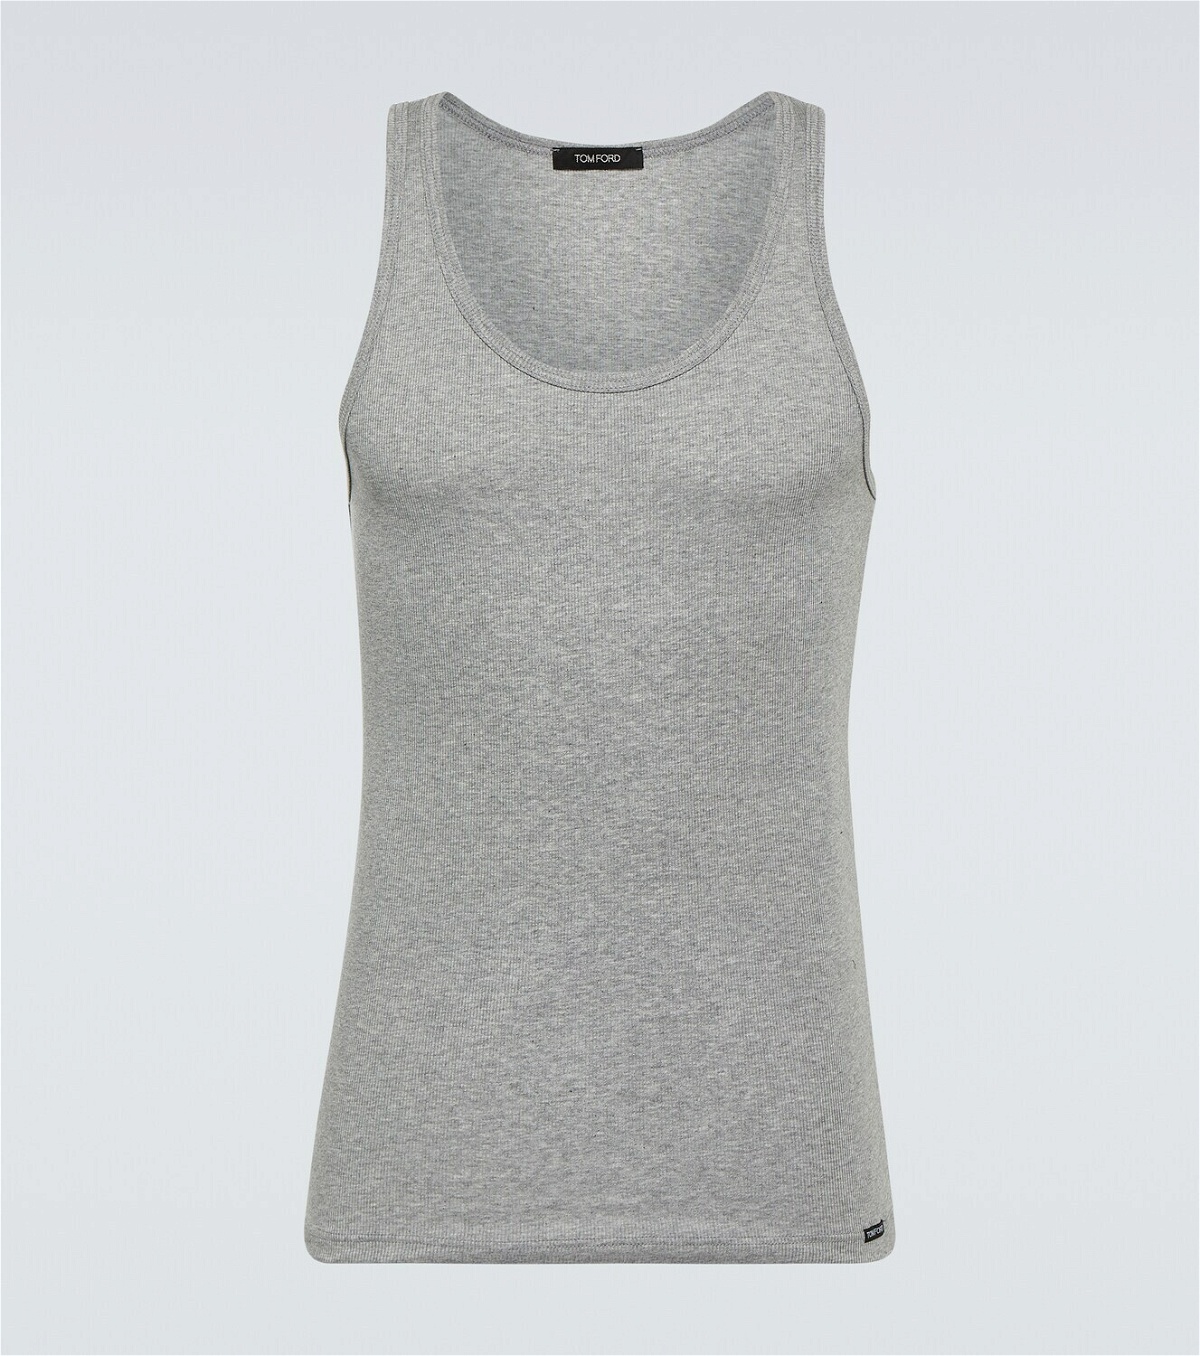 Tom Ford Cotton and modal jersey tank top